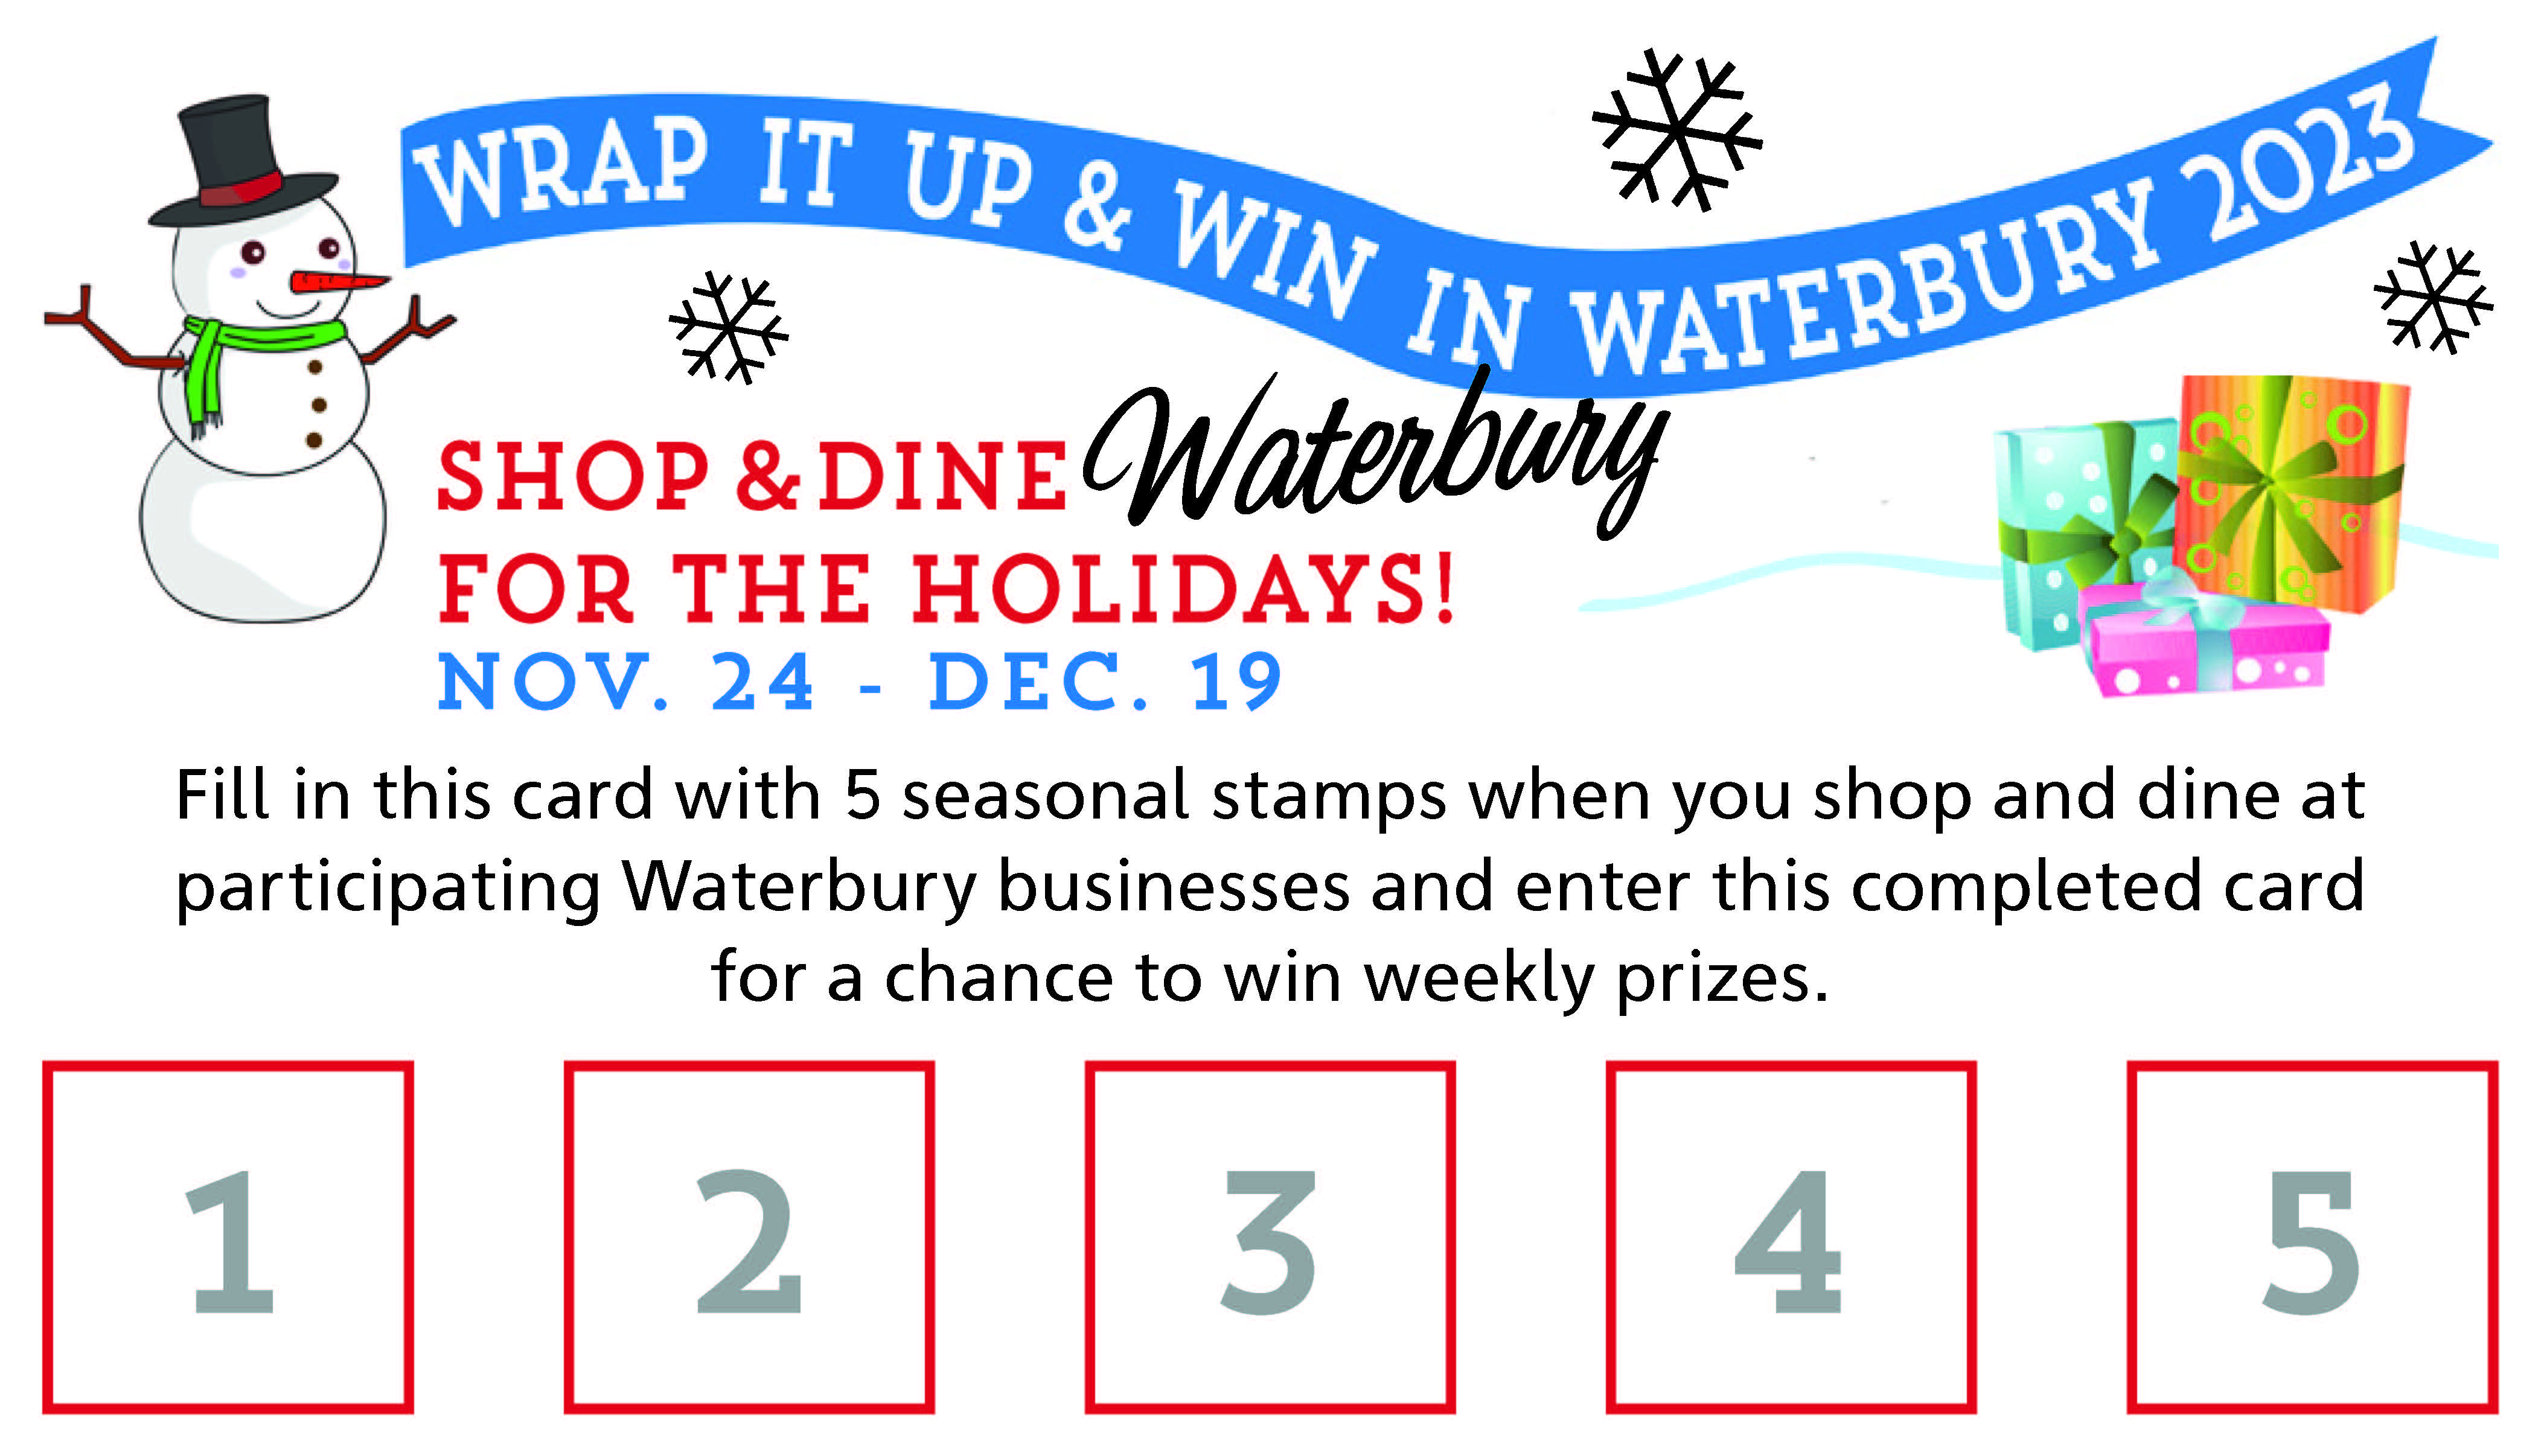 Graphic saying "Wrap It Up & Win, Shop & Dine Nov 24 to Dec 19